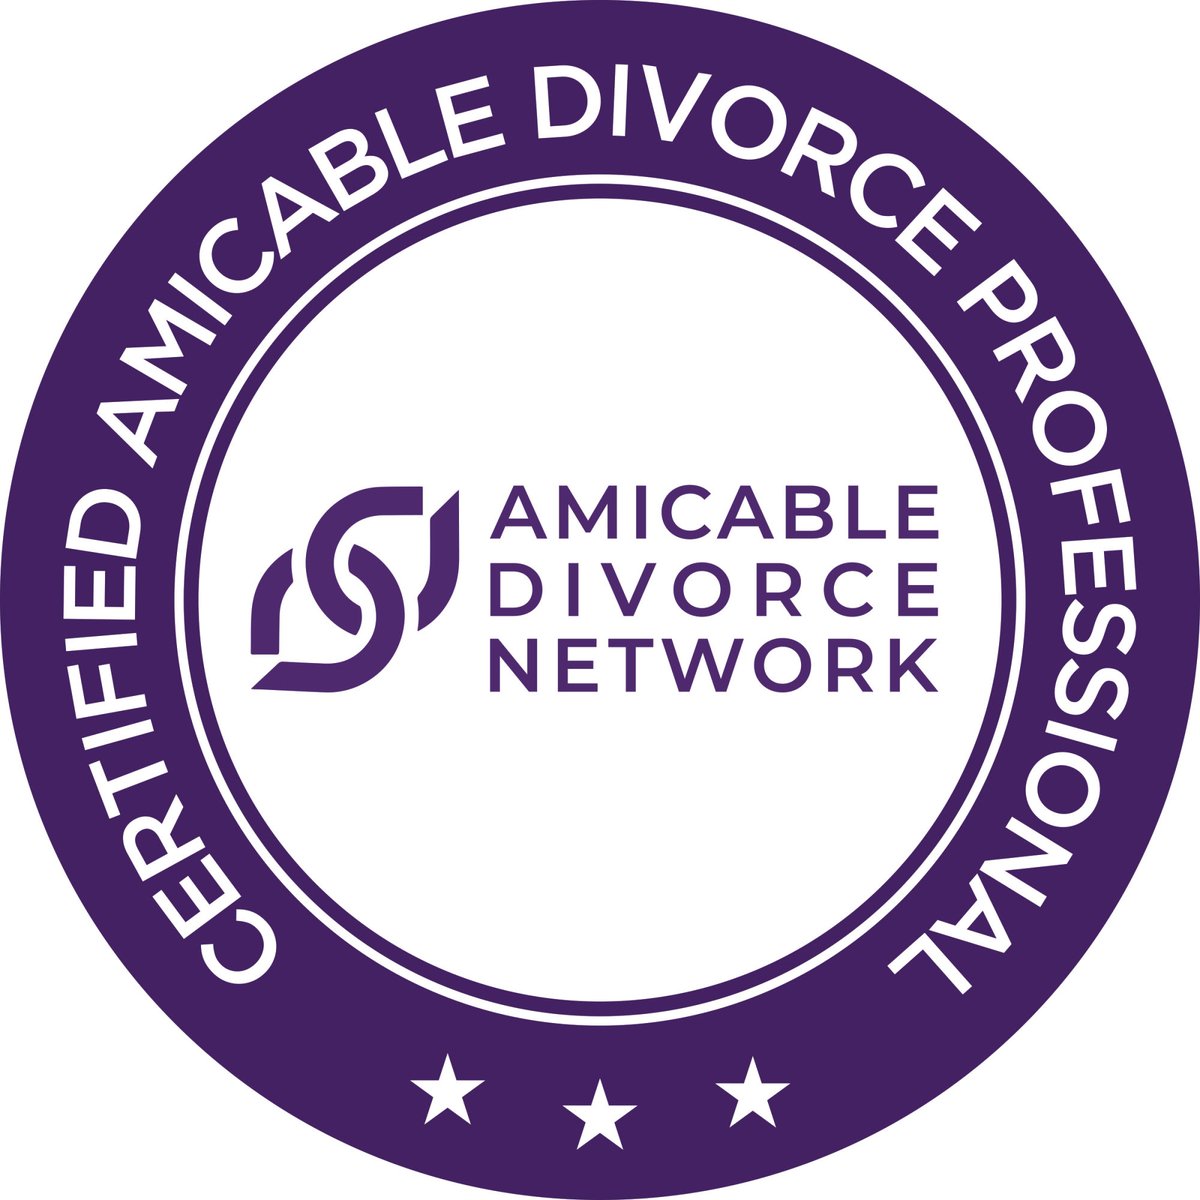 Joanne Kleiner received the Certified Amicable Divorce Professional Designation from the Amicable Divorce Network, specializing in navigating divorce issues outside of court. #amicabledivorce #padivorce